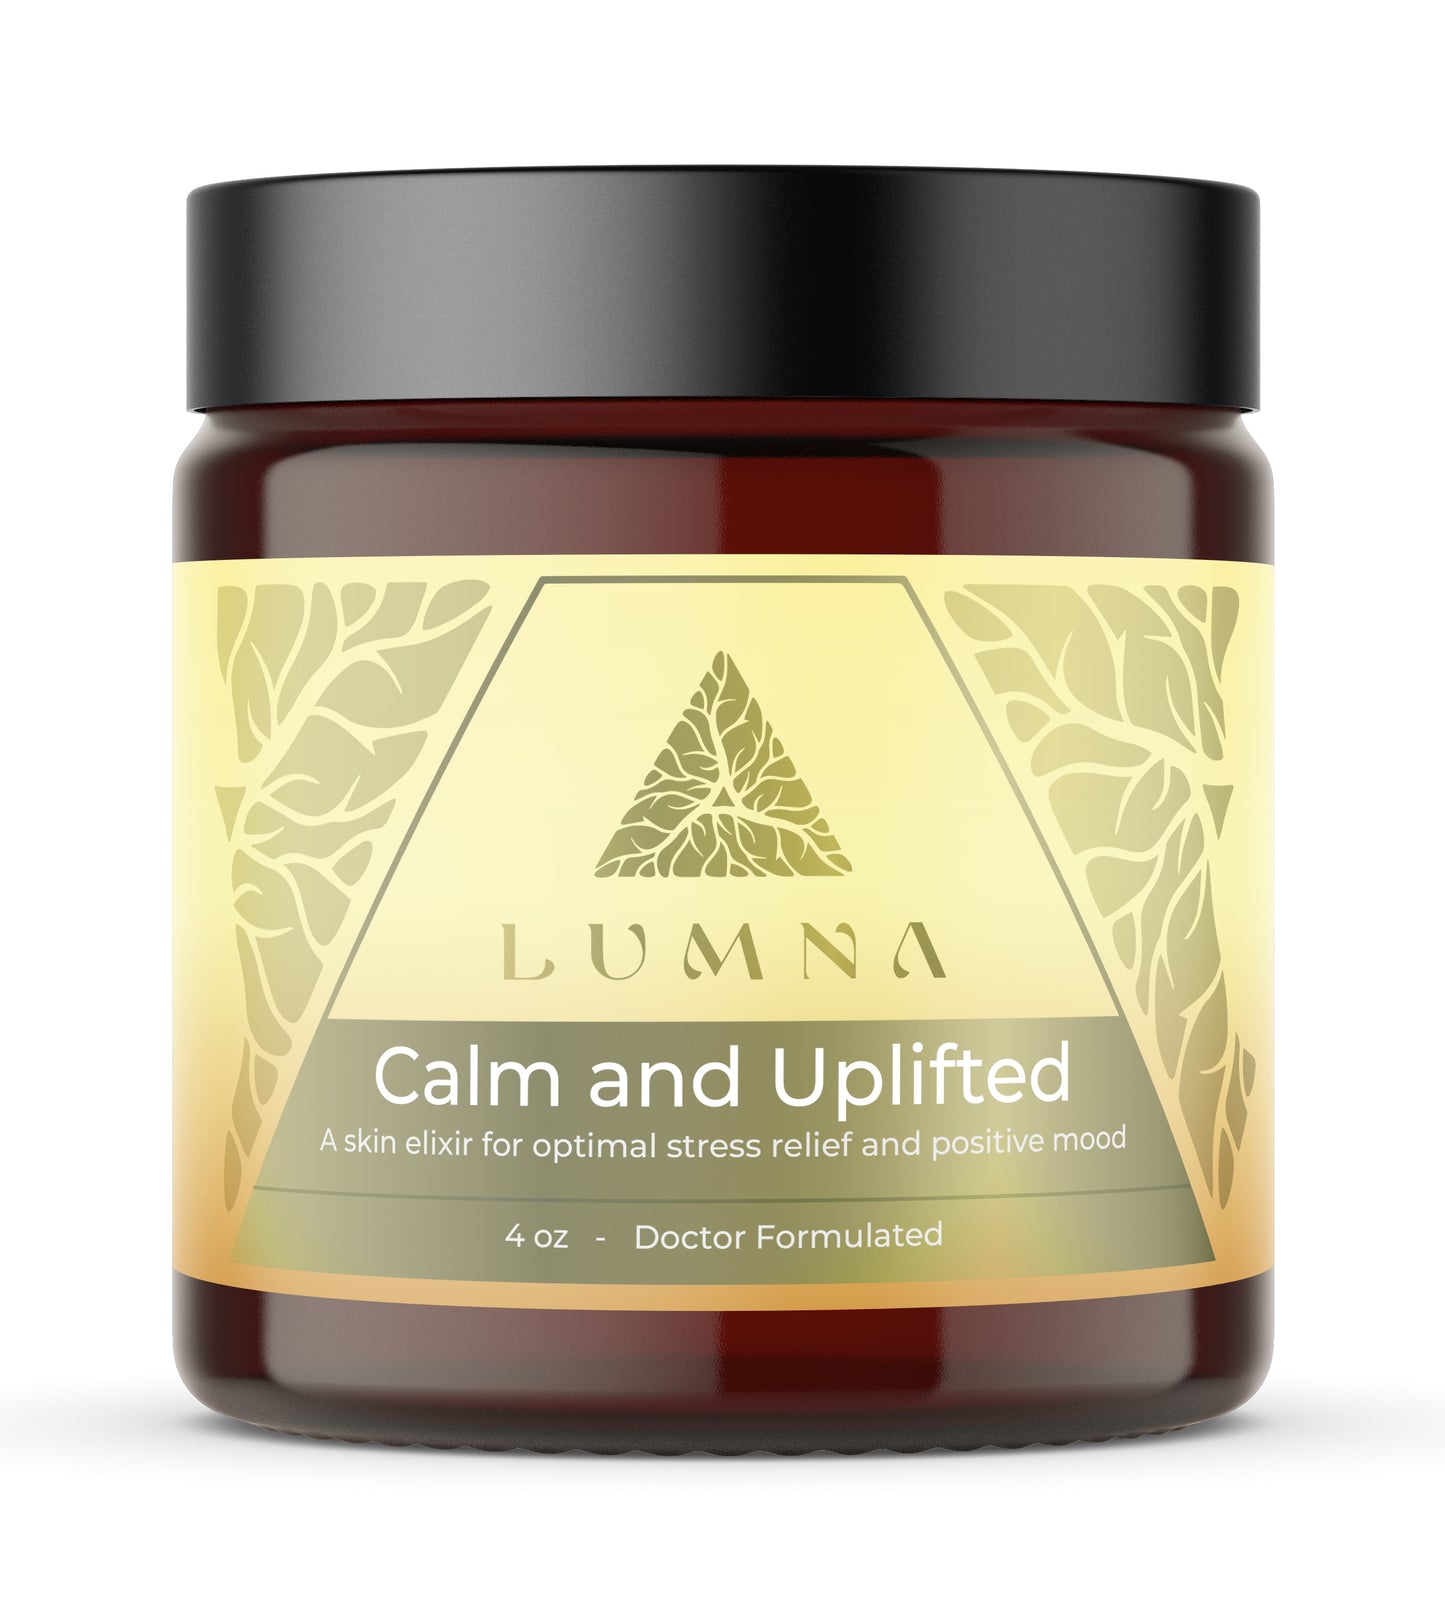 Calm and Uplifted - Clinical Trial Sample